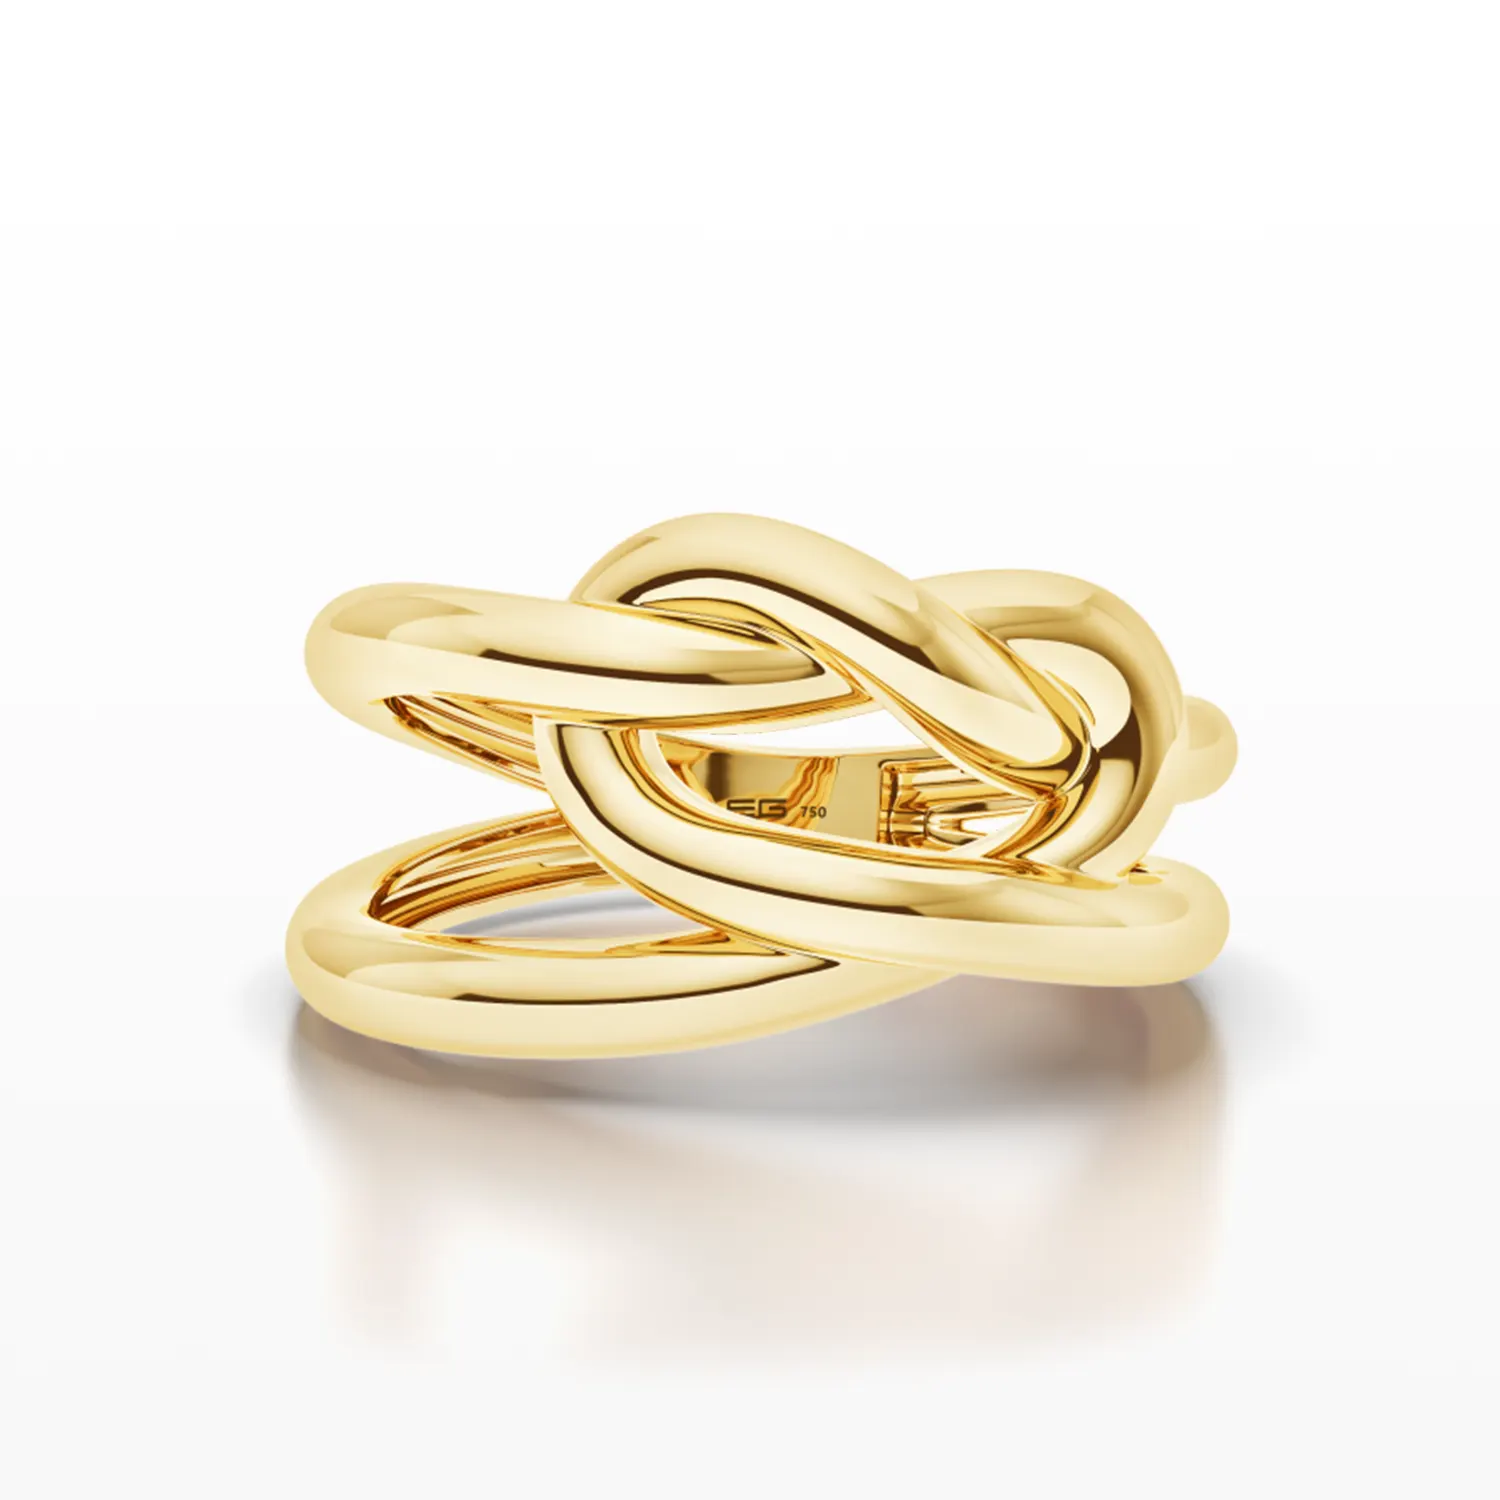 Deformed Curved Knot Ring